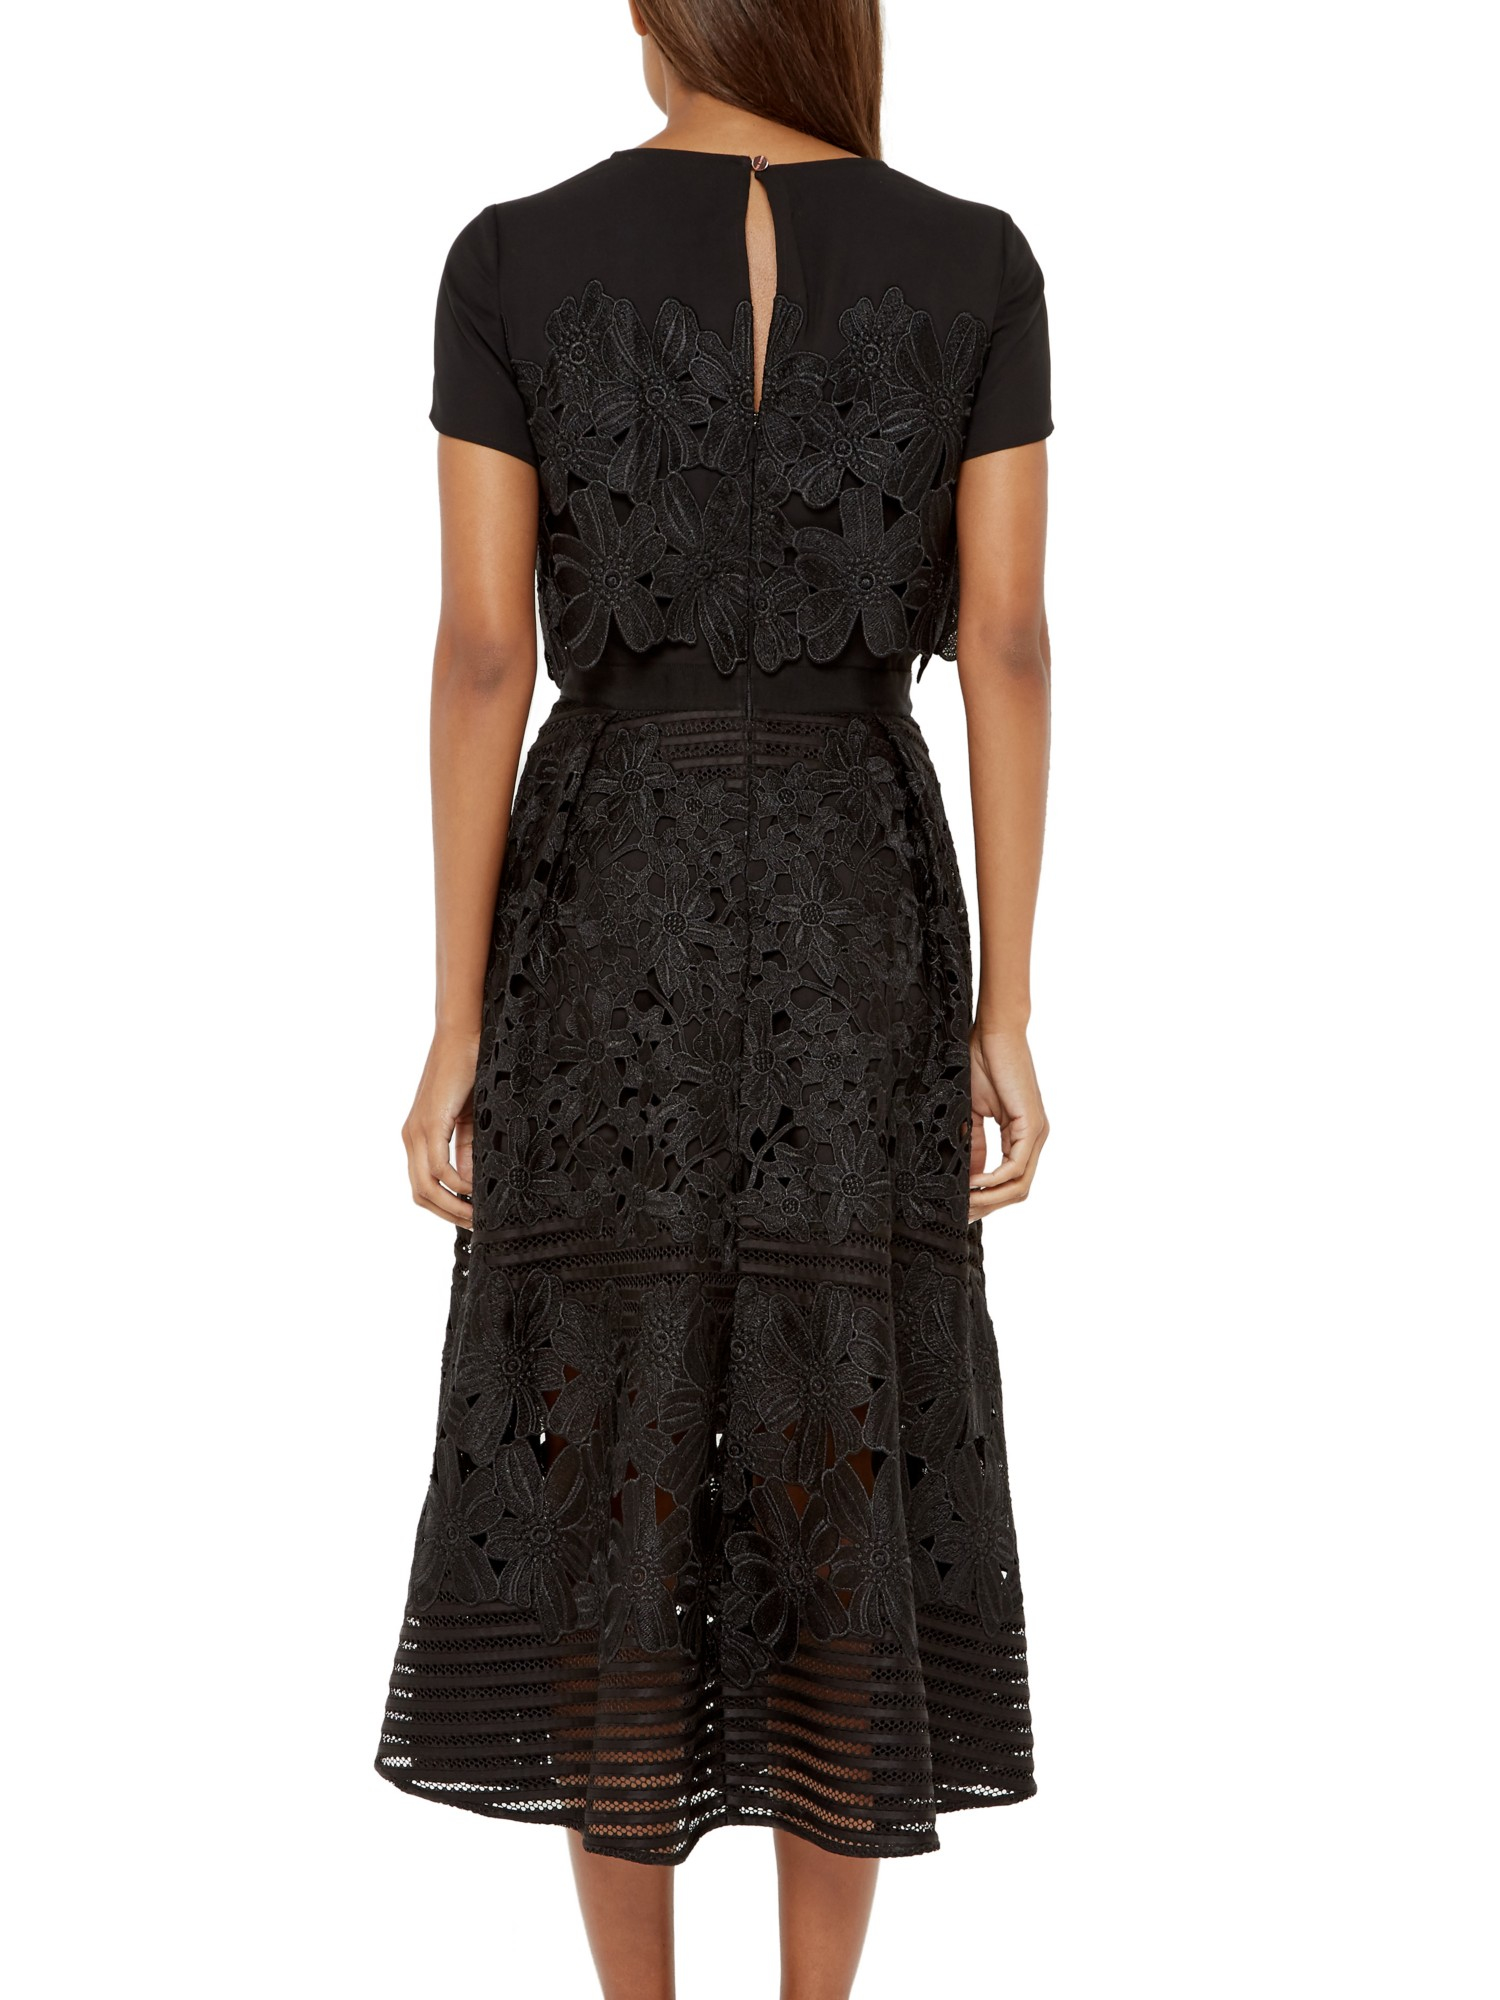 Ted Baker Janelle Layered Lace Midi Dress in Black - Lyst